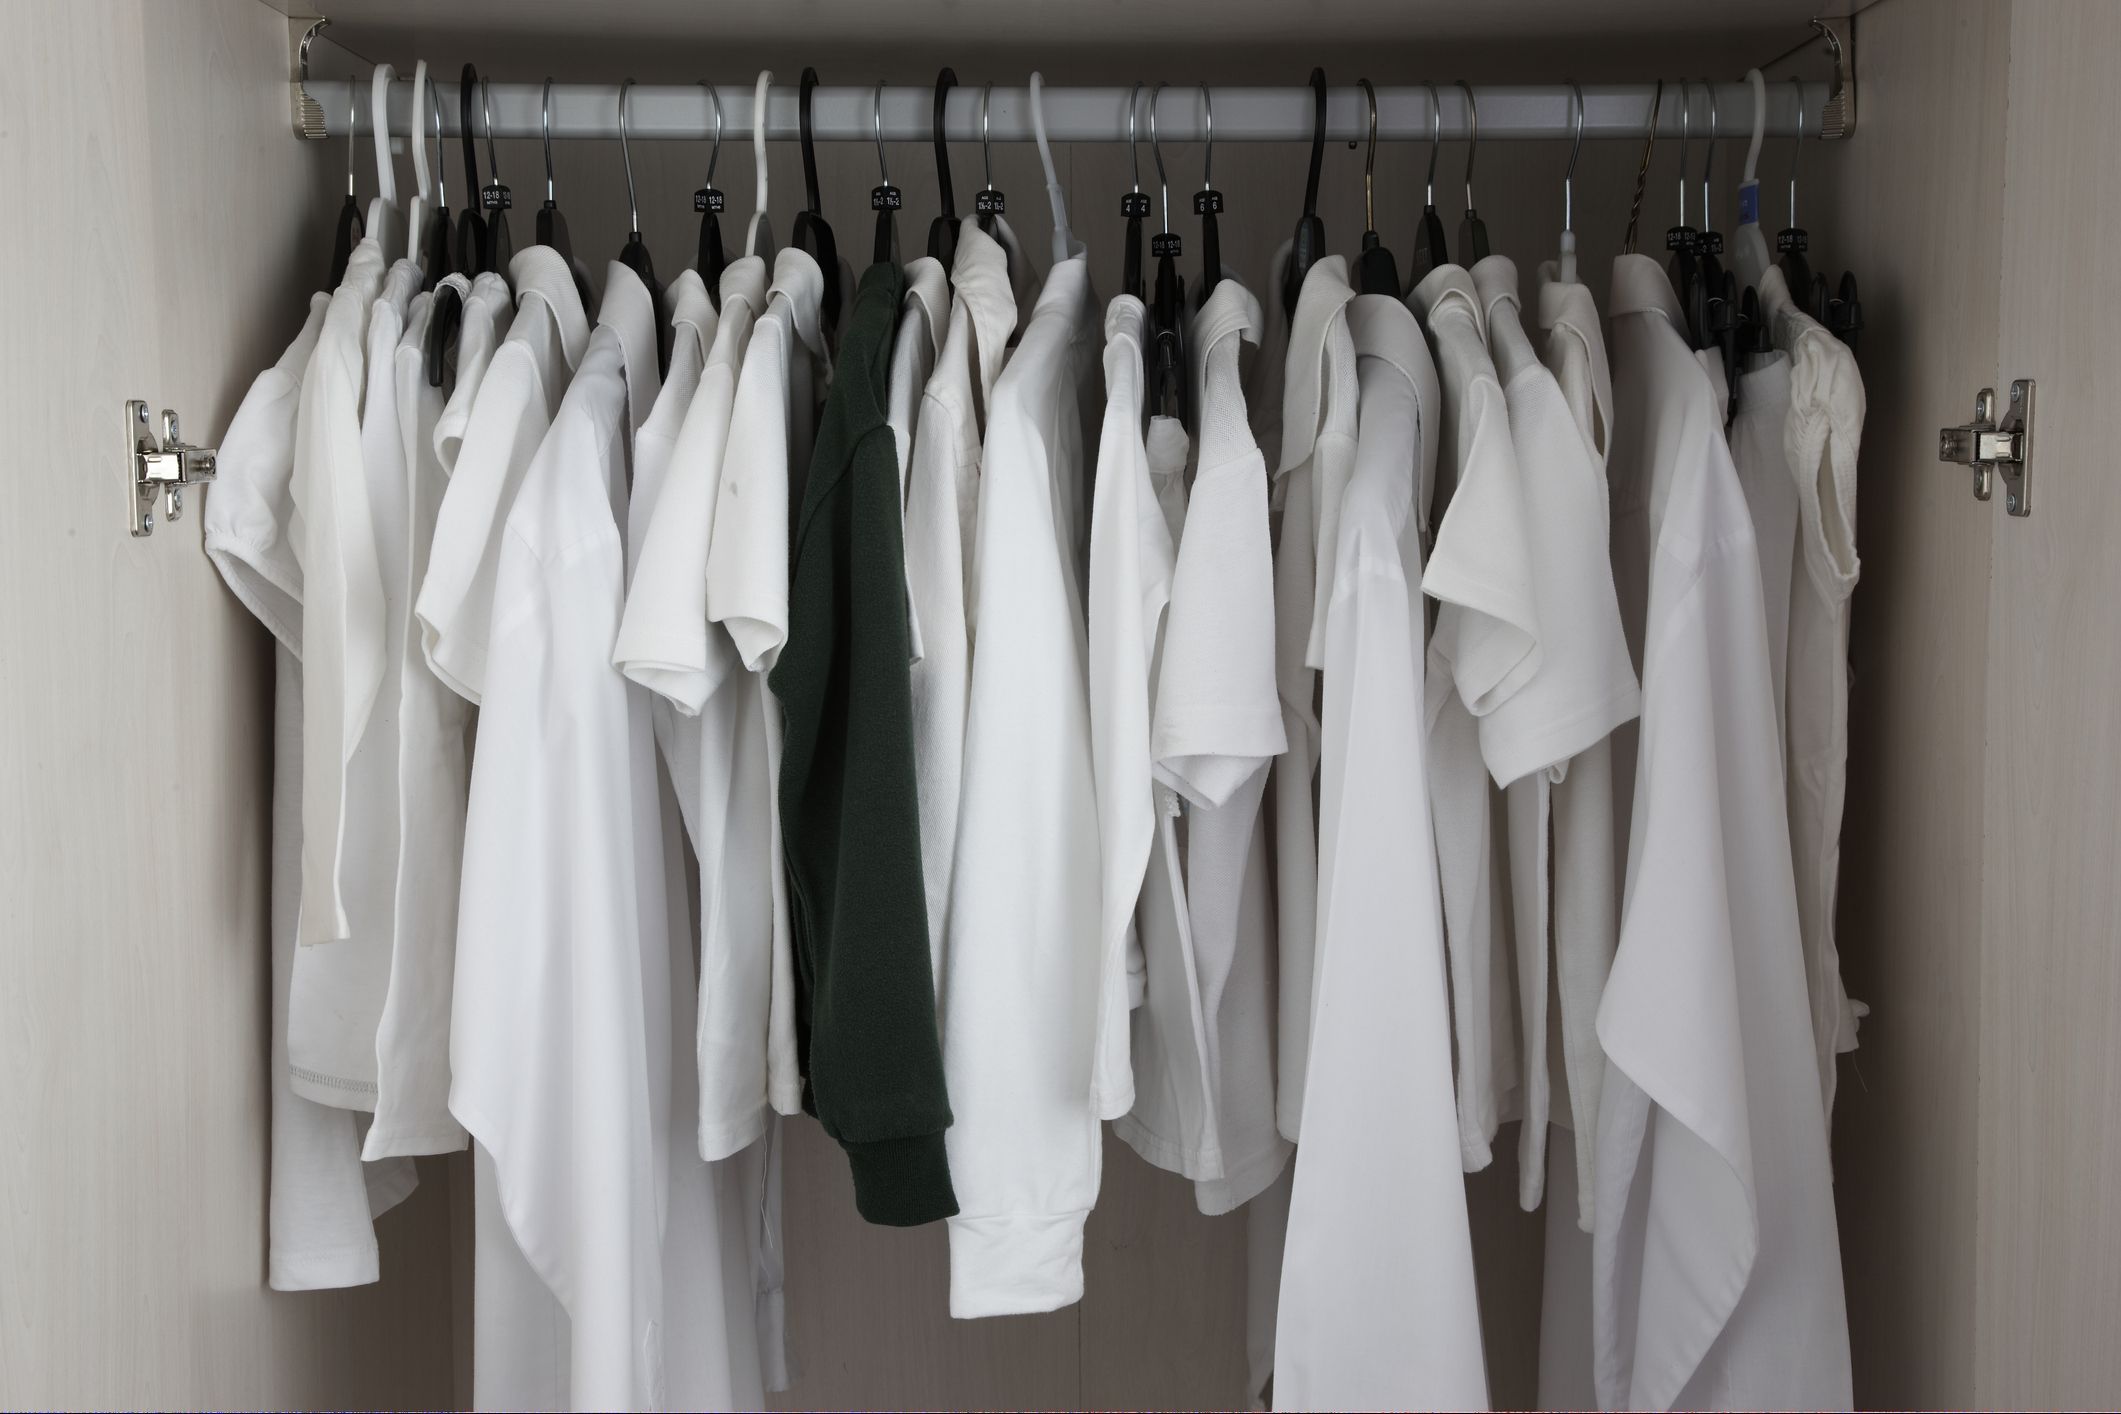 The history behind the rule of not wearing white after Labor Day